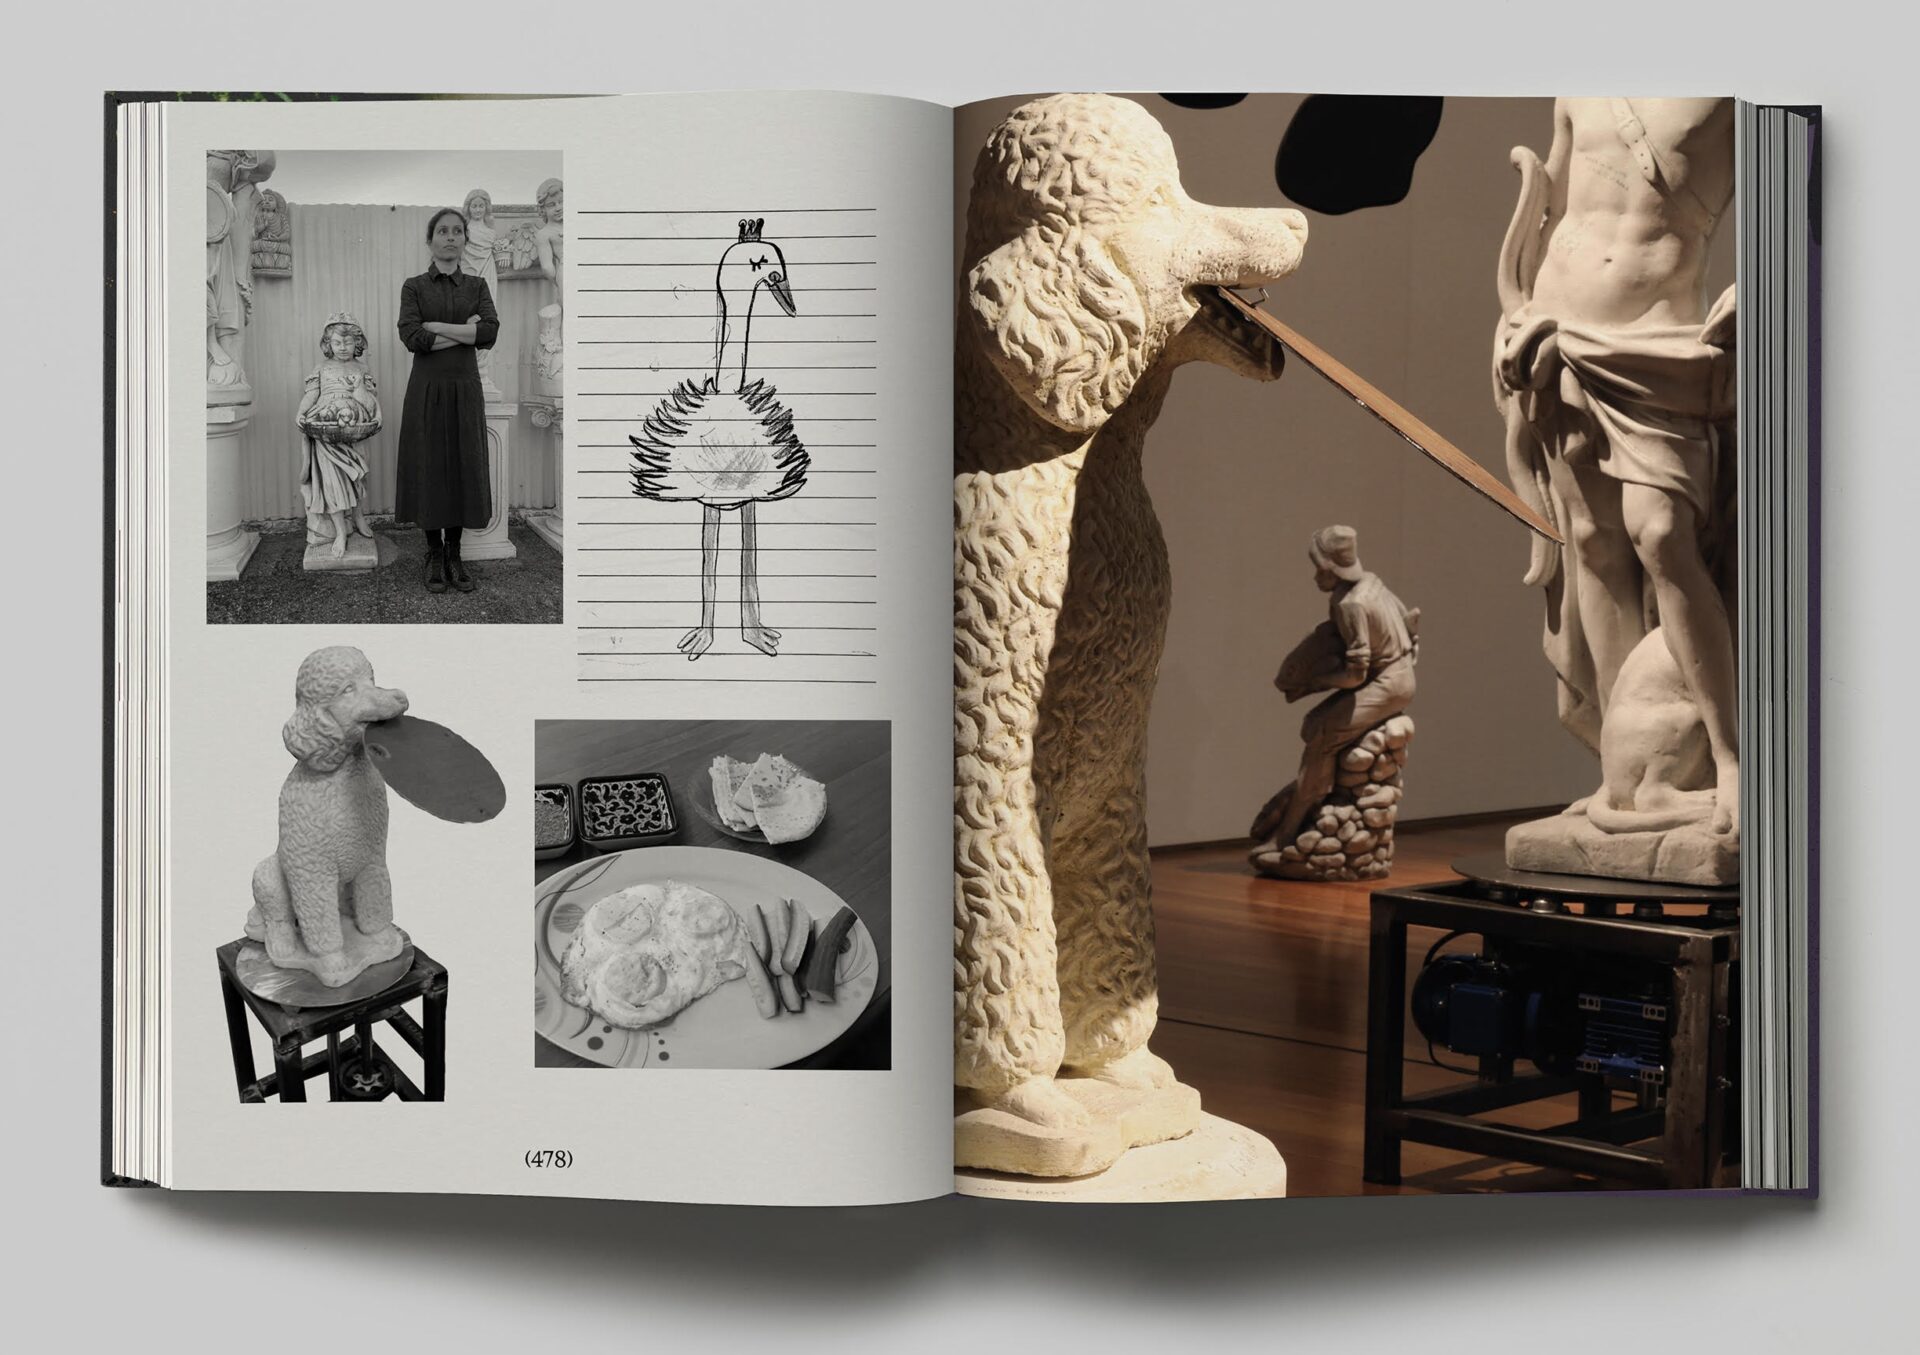 a spread from Escif's forthcoming book showing photos and sketches on the left and a photograph of sculptures on the right